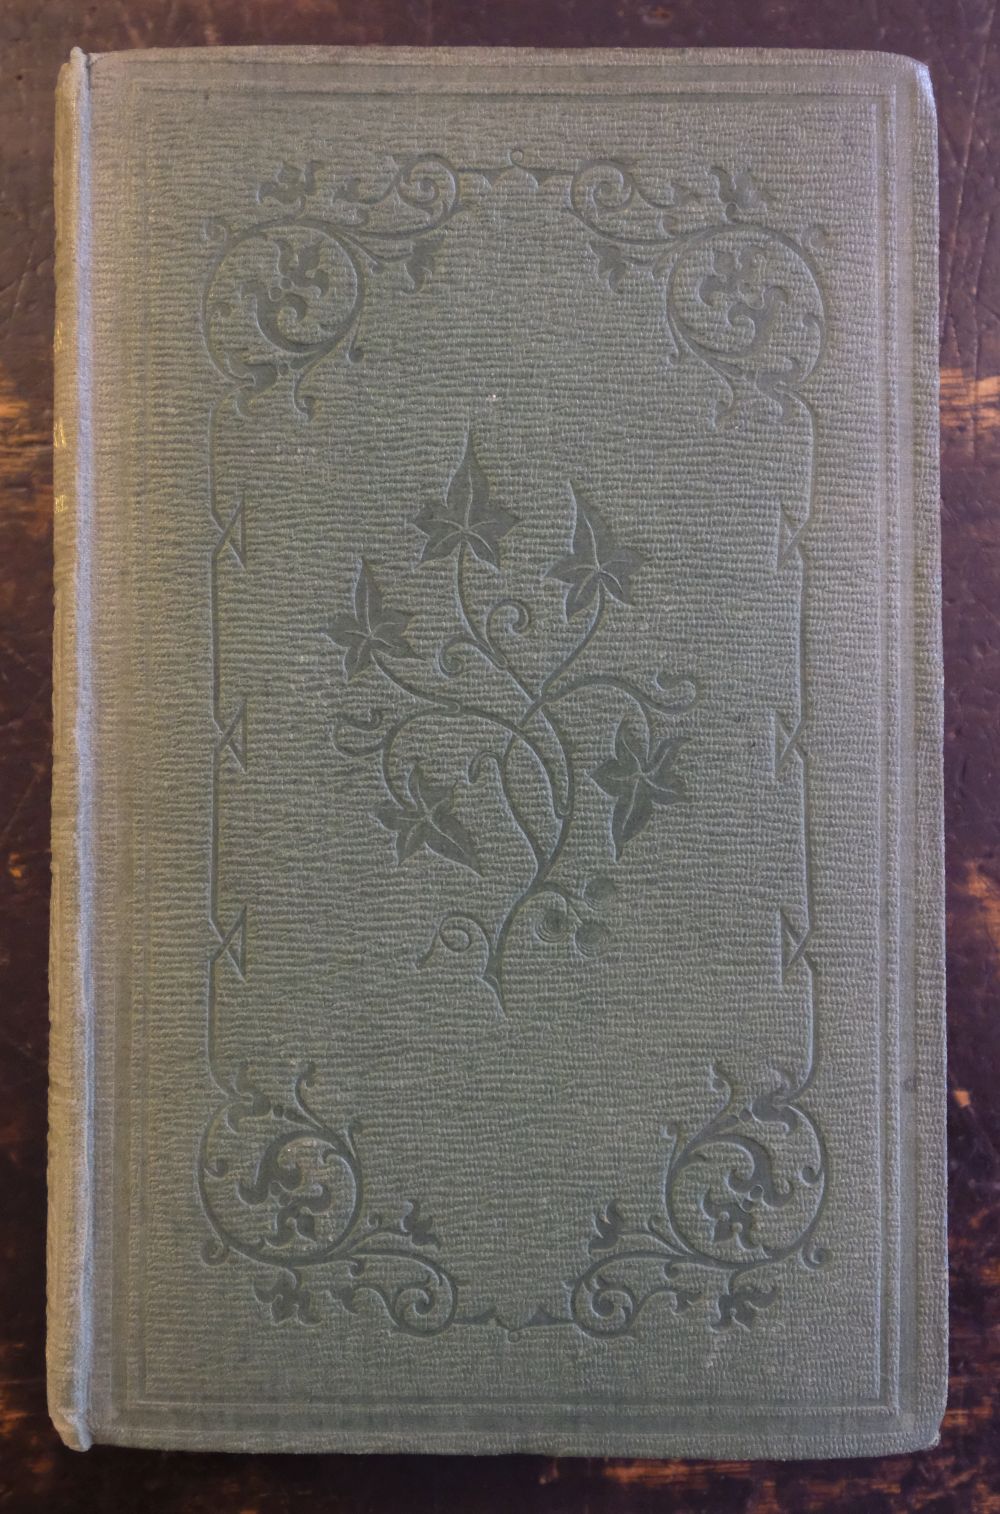 Neave (Sir Digby). Four Days in Connemara, 1st edition, 1852 - Image 2 of 10